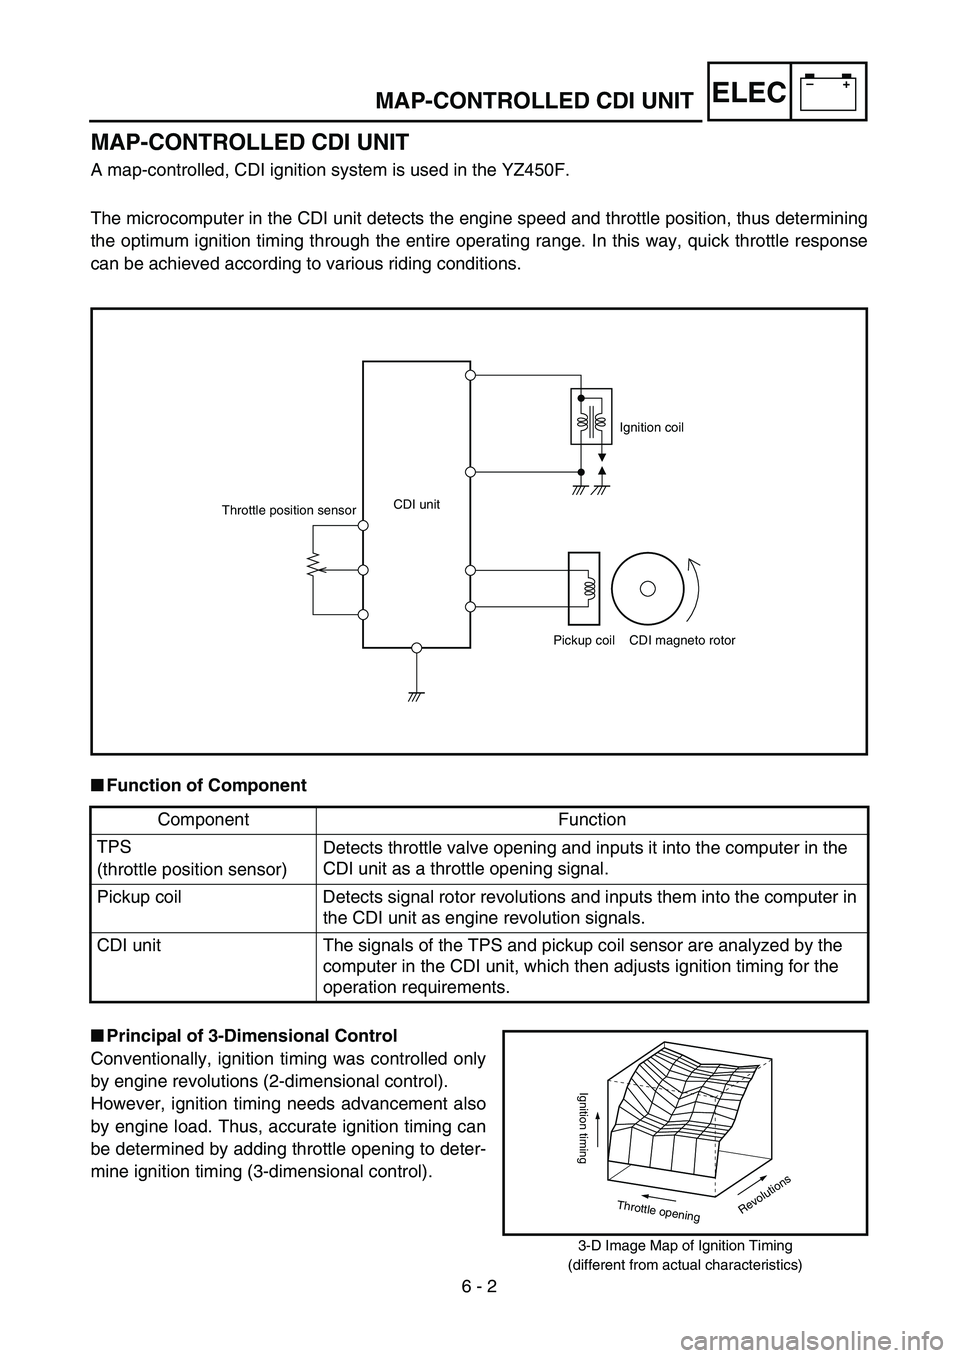 YAMAHA YZ450F 2004 User Guide –+ELEC
6 - 2
MAP-CONTROLLED CDI UNIT
MAP-CONTROLLED CDI UNIT
A map-controlled, CDI ignition system is used in the YZ450F.
The microcomputer in the CDI unit detects the engine speed and throttle posi